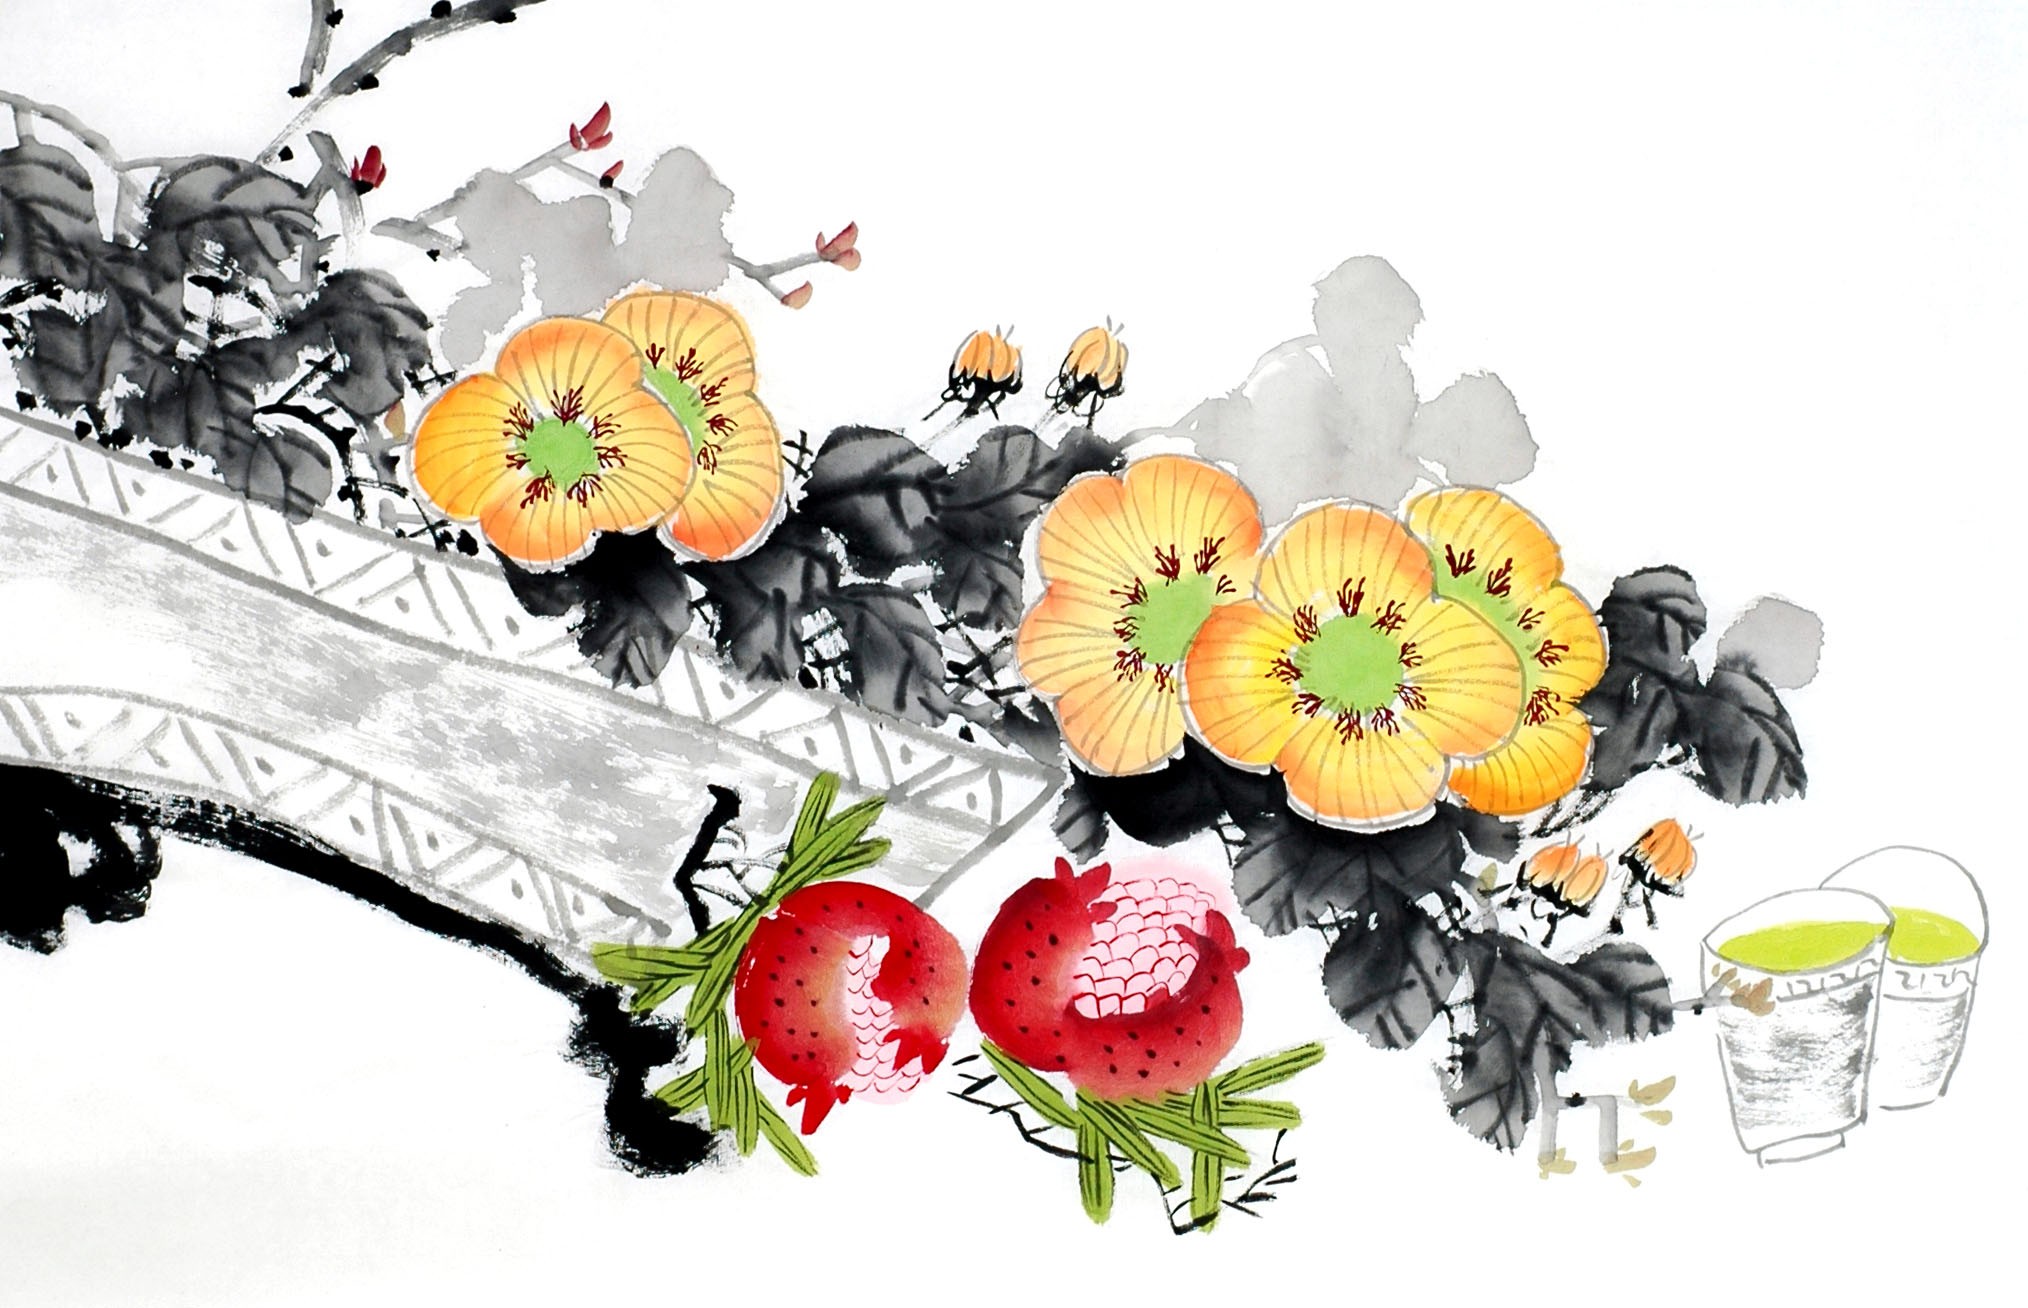 Chinese Flowers&Trees Painting - CNAG012959